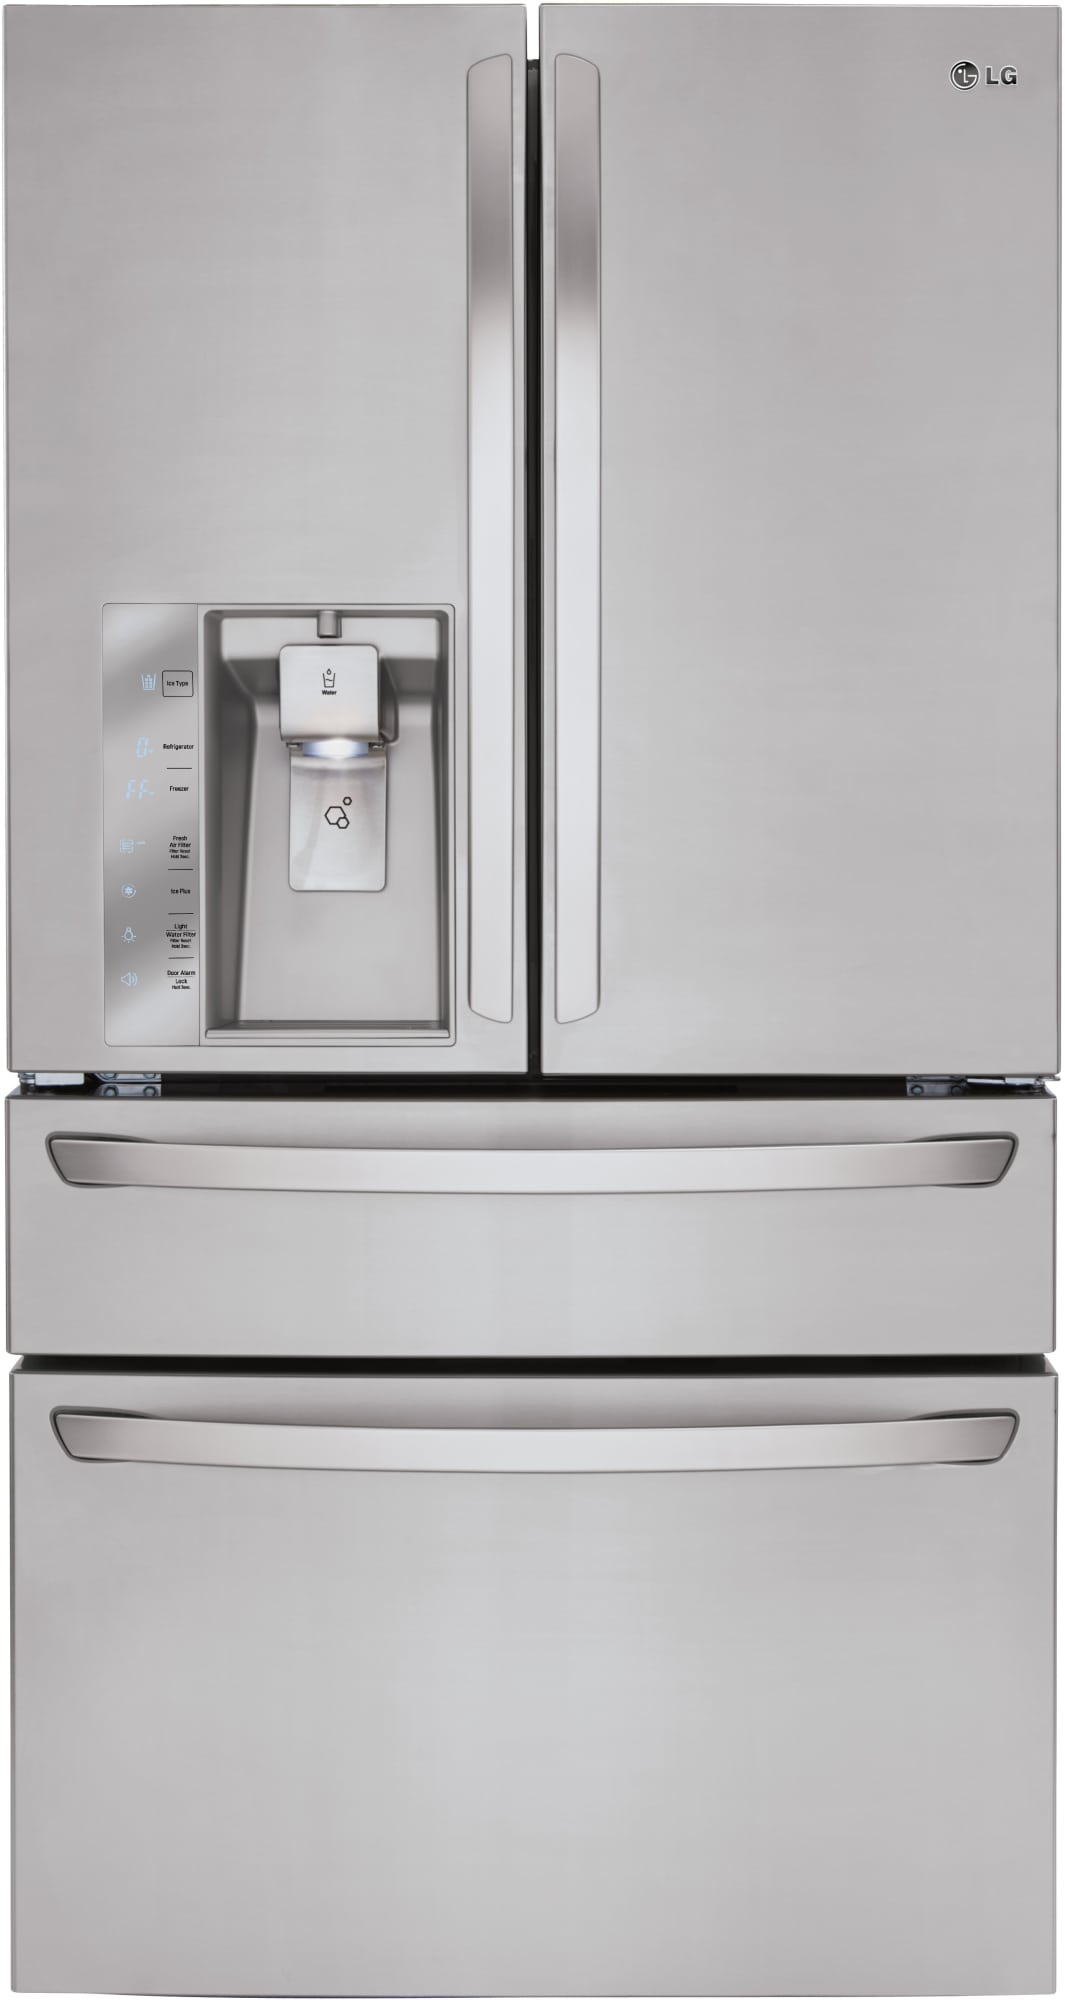 LG LMXS30756S 29.9 cu. ft. French Door Refrigerator with 4 SpillProtector Glass Shelves